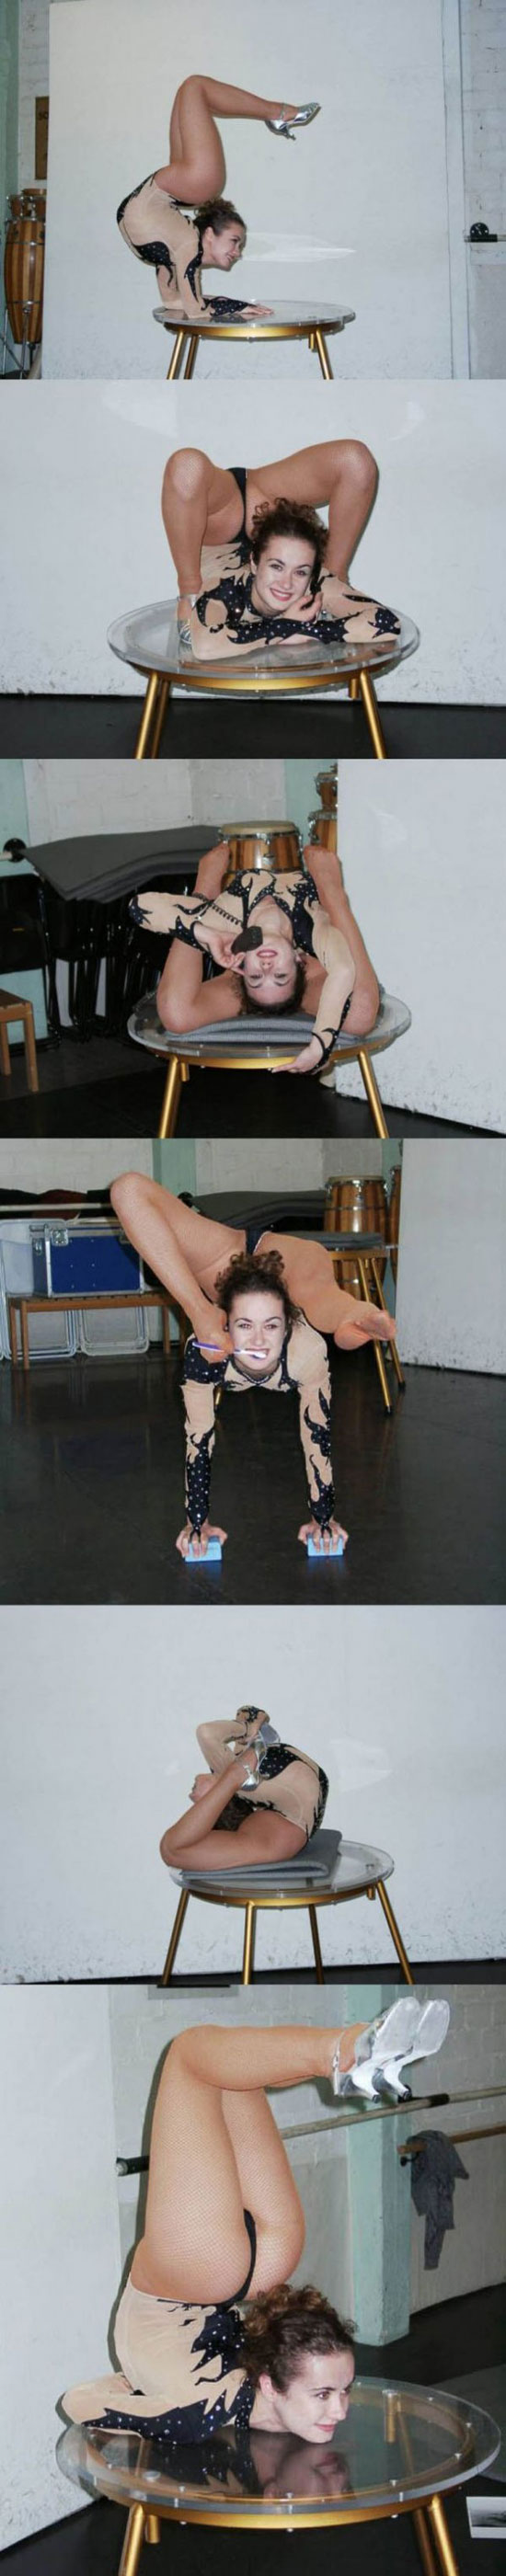 extremely flexible chick